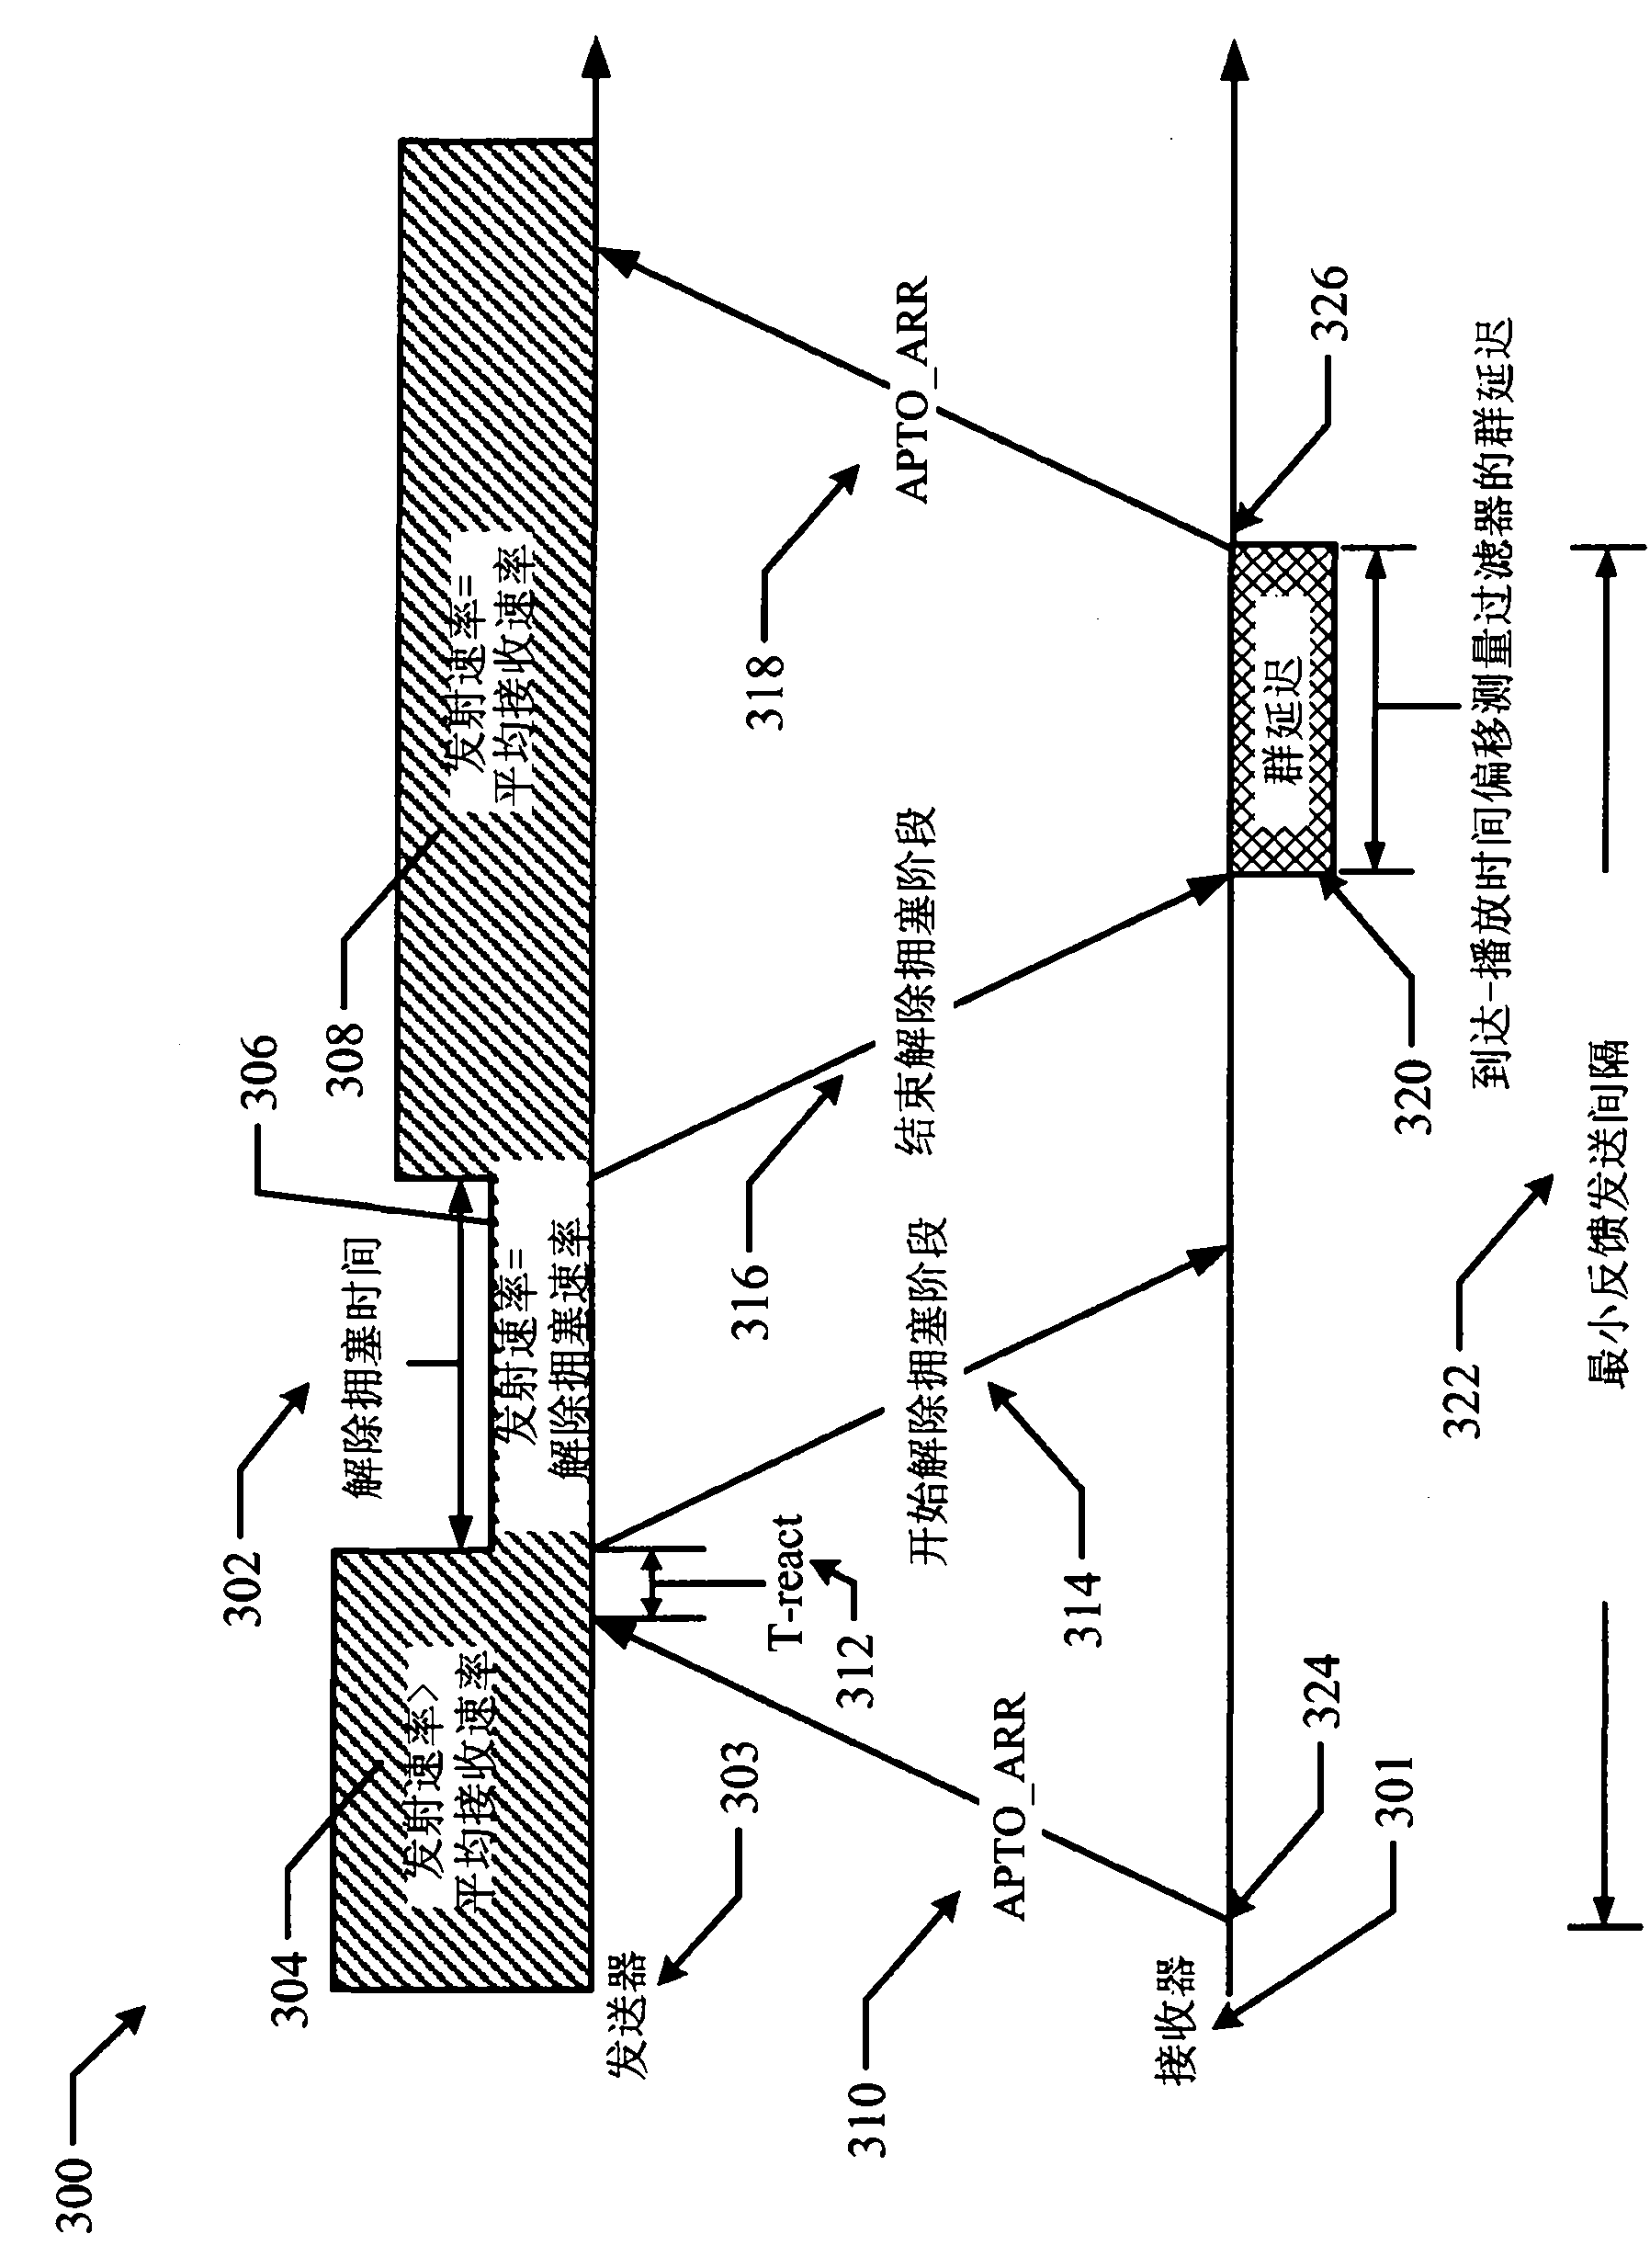 System and method to adapt to network congestion